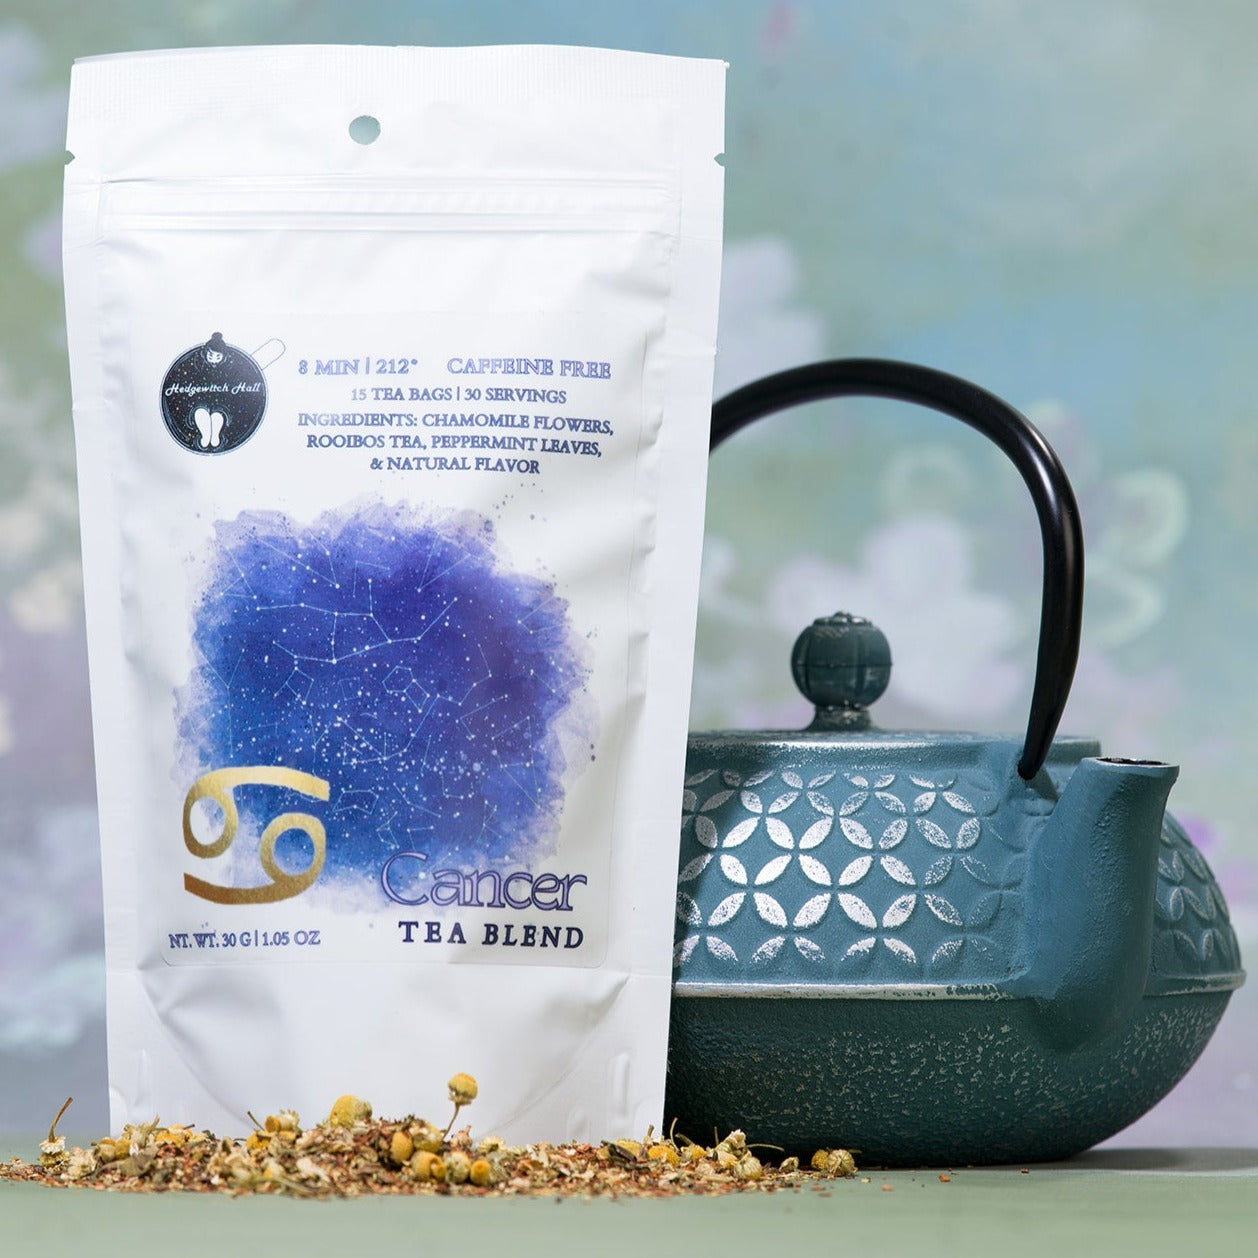 Product photo of Cancer tea blend and teal teapot.